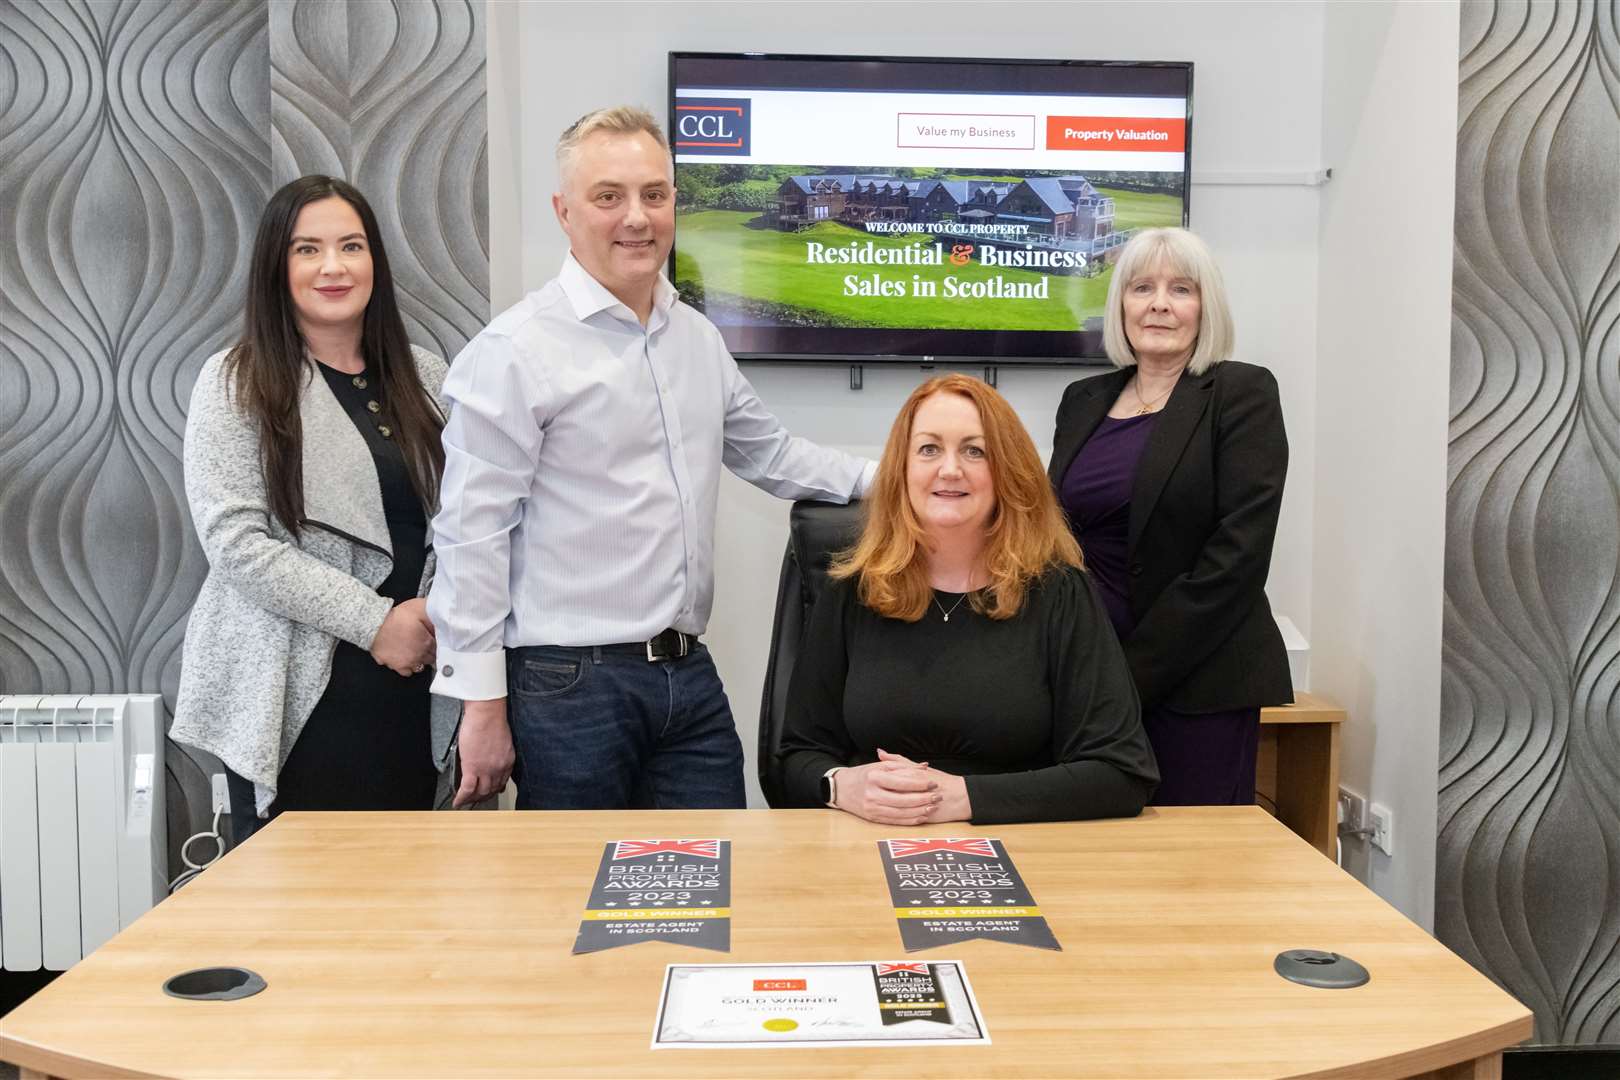 From left: Claire Millar (Business Development Manager), David Pickering (Commercial Director), Coralie Pickering (Managing Director) and Audrey Pope (Residental Property Manager) from CCL in Elgin have won gold in the British Property Awards for Estate Agents in Scotland 2023...Picture: Beth Taylor.